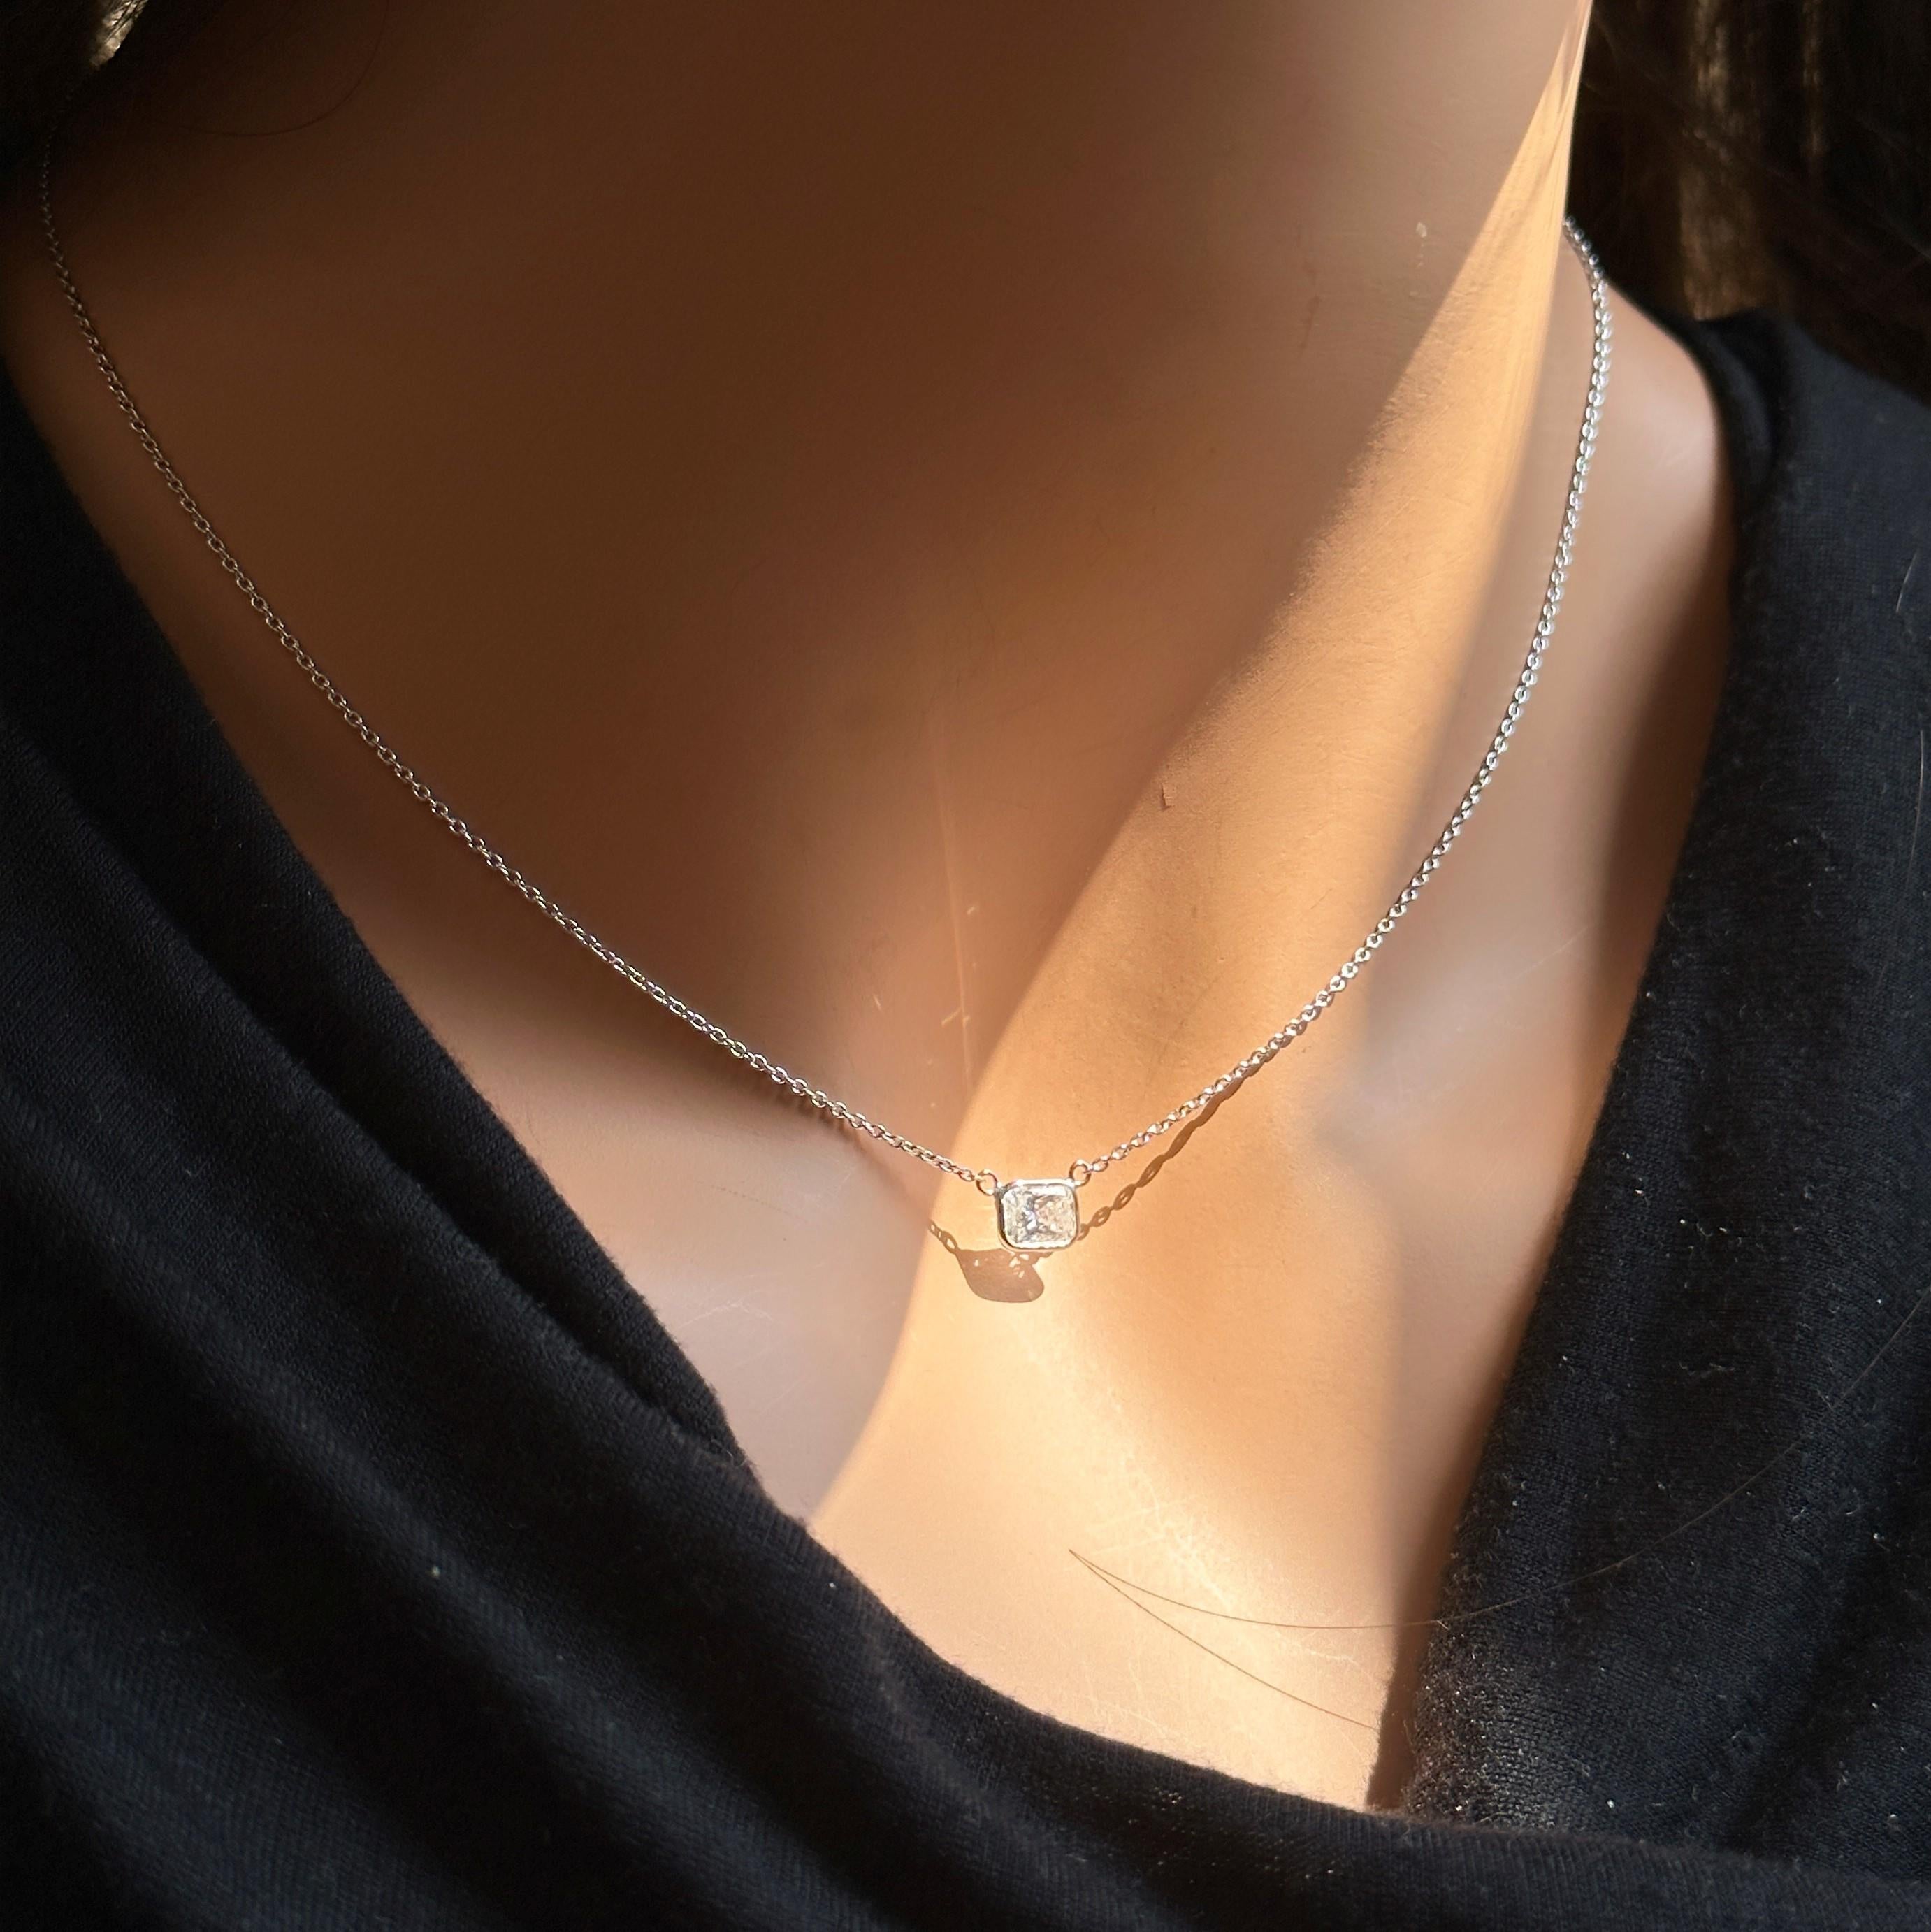 Make a statement worn solo and level up your collar candy when layered. How would you wear it? This is a natural Radiant, color F and clarity SI3, EGLUSA certified handmade necklace wire-wrapped in 14k white gold. This is a piece you'll wear